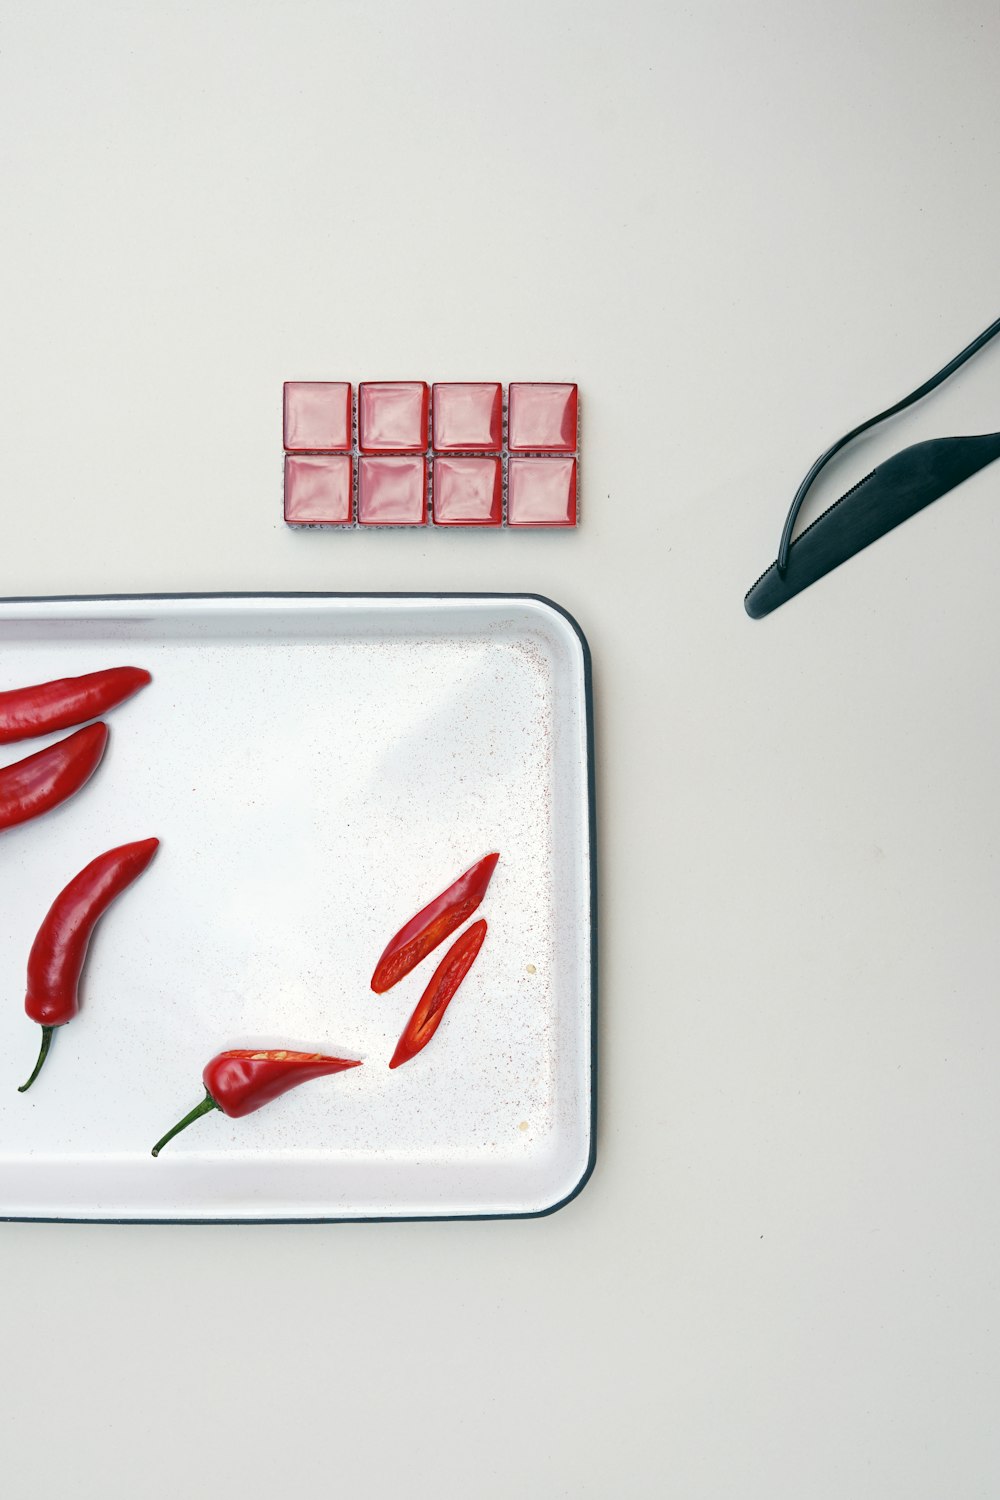 sliced chili on plate